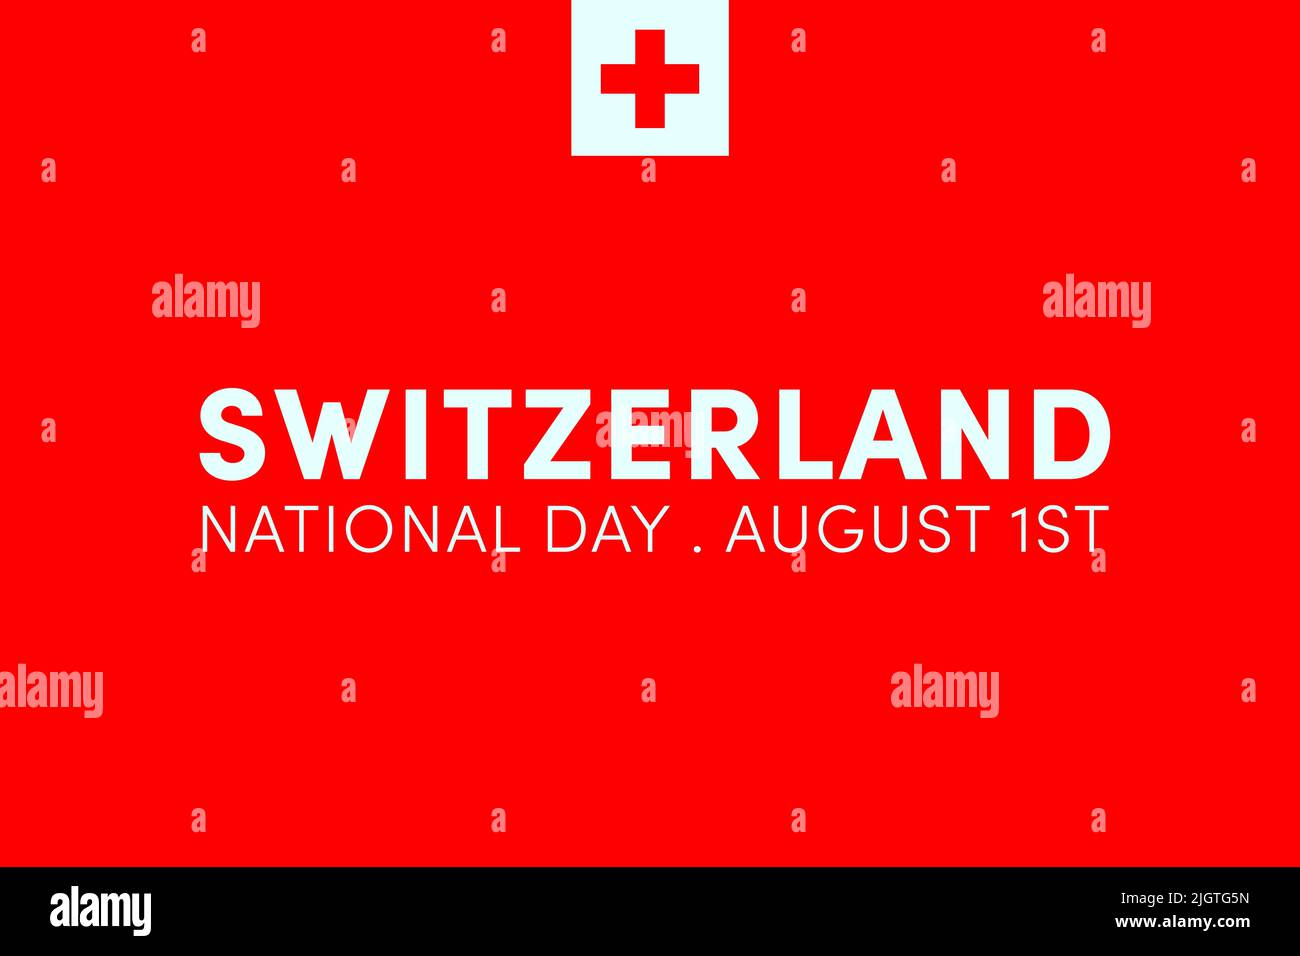 Switzerland national day. Founding of the Swiss Confederation on 1st of August. Swiss flag background. Stock Photo